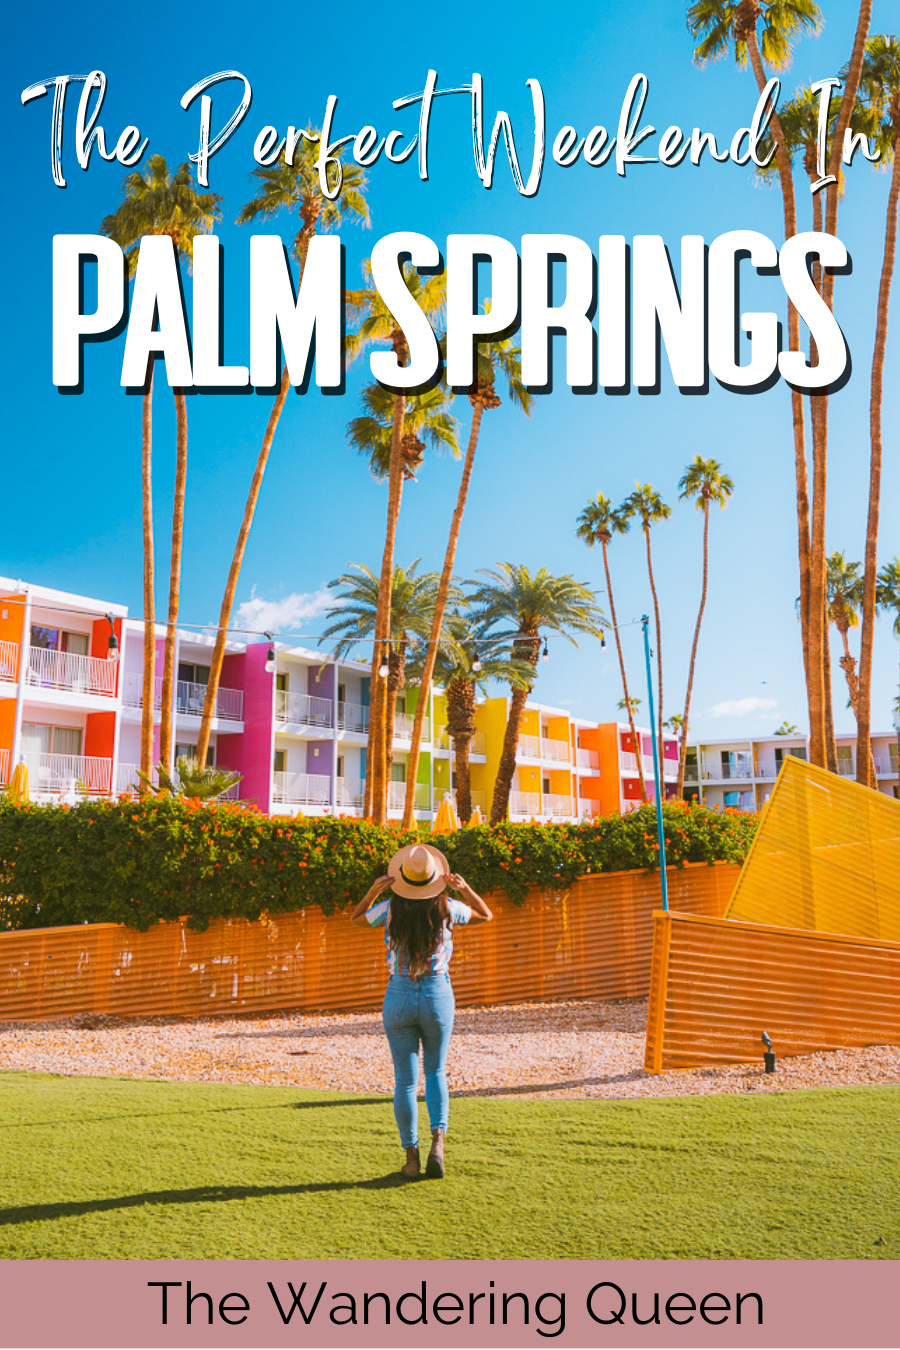 Discover Palm Desert - The Gardens on El Paseo is now OPEN! Anthropologie,  Louis Vuitton and more retailers are now open for shopping. Give your  favorite shop a call to see if